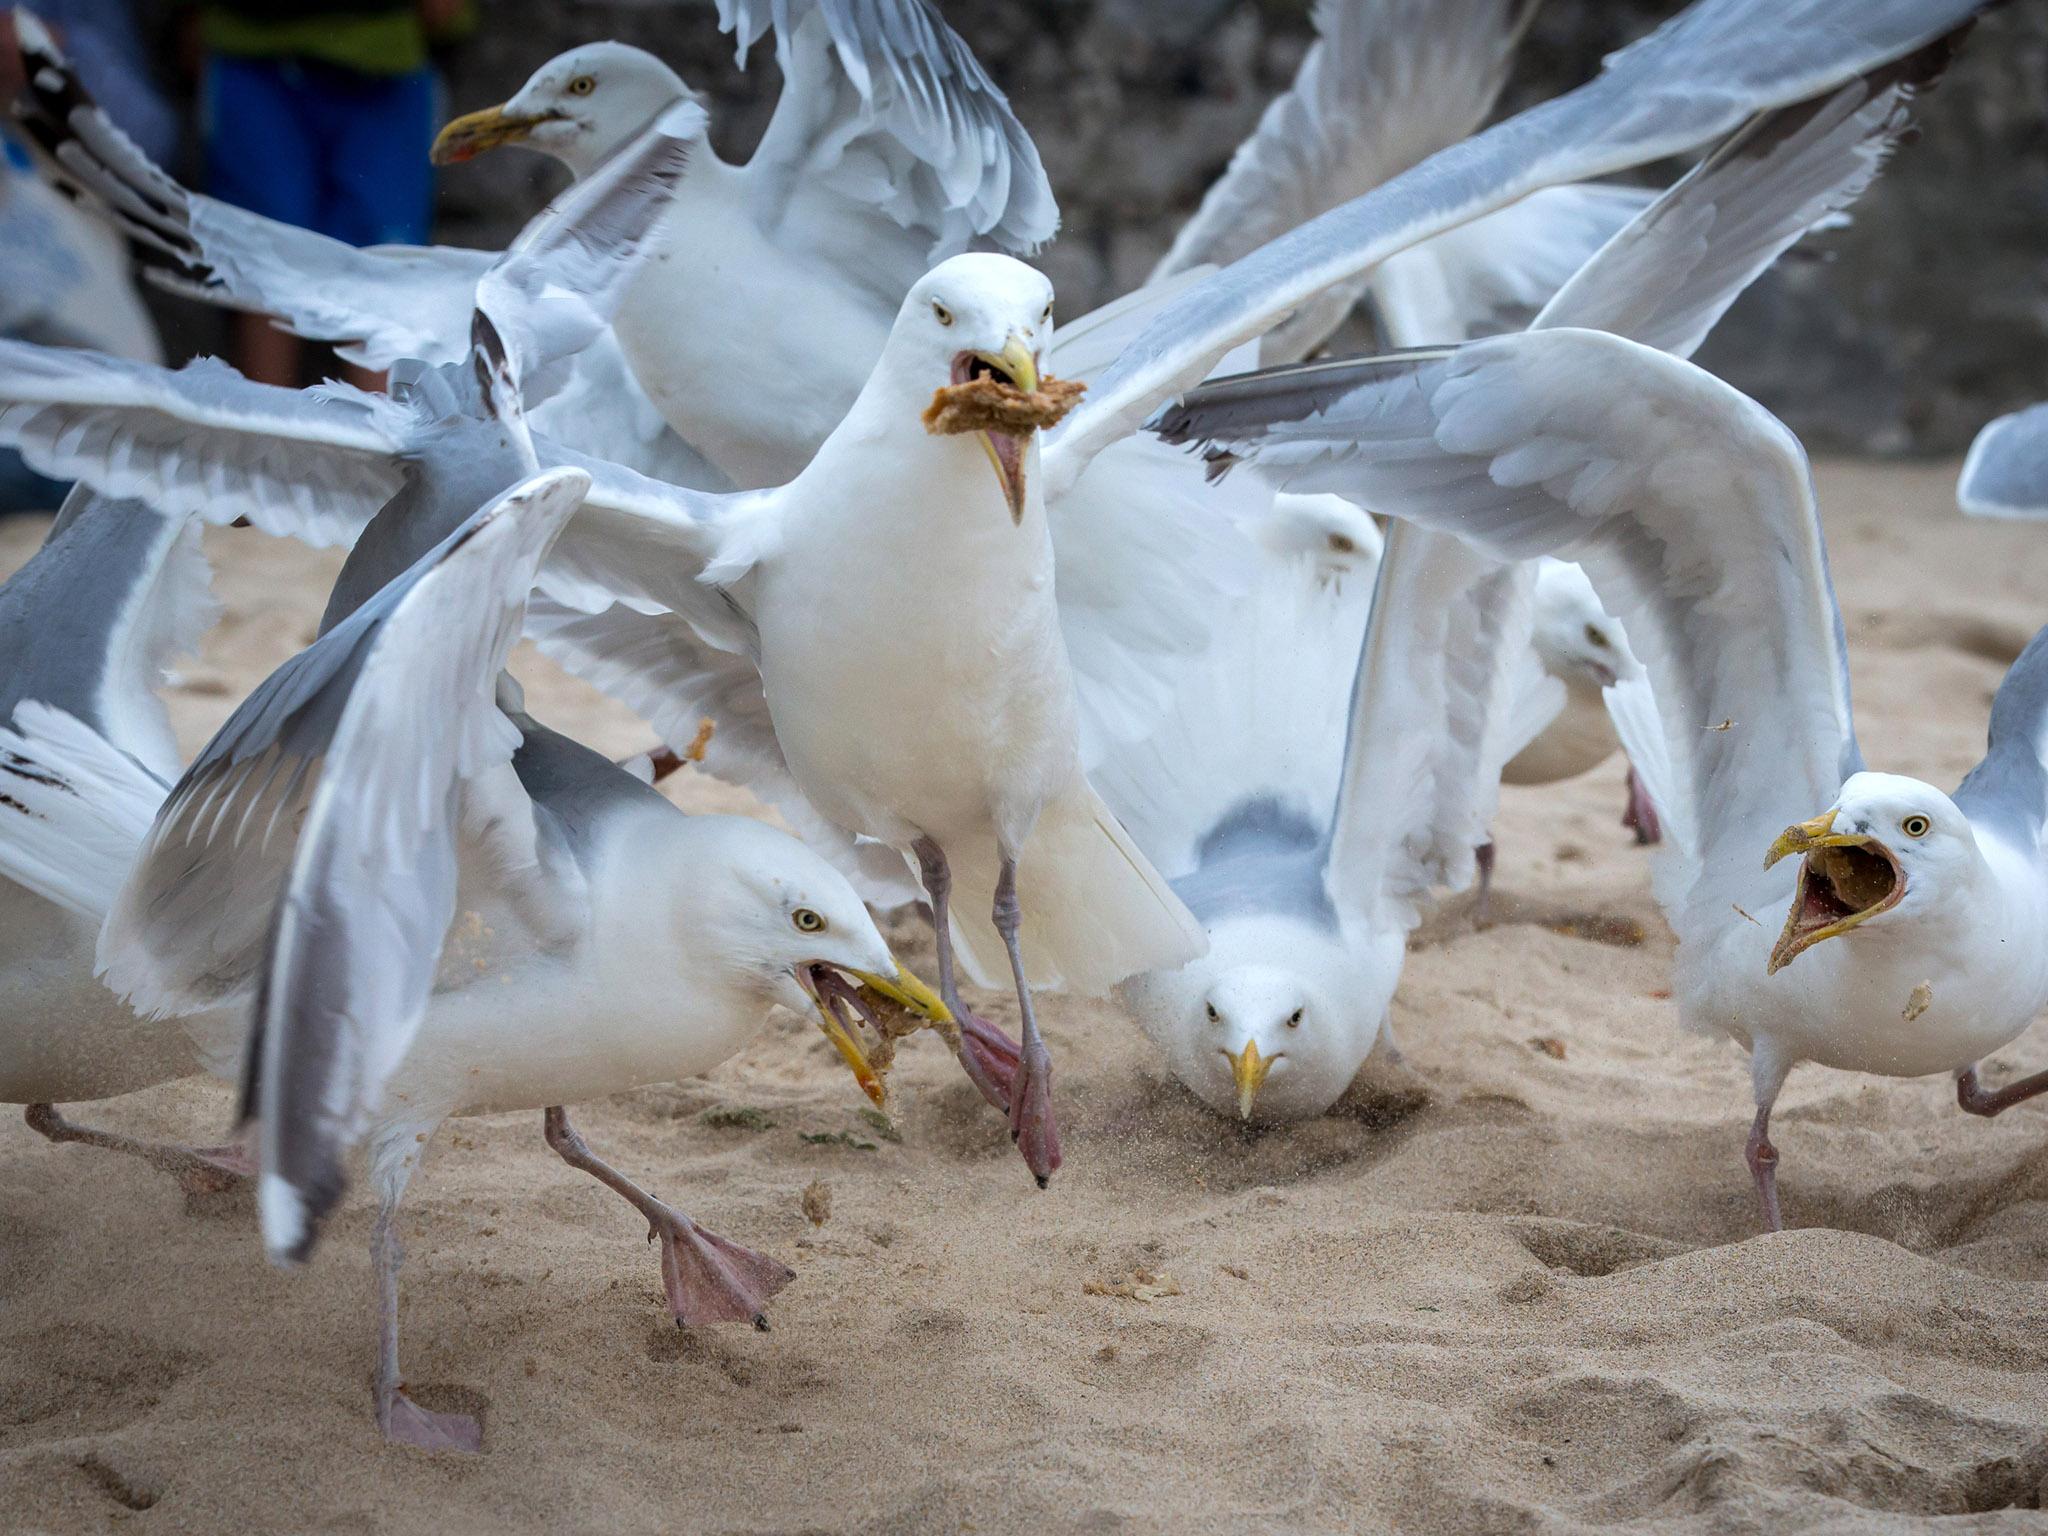 The seagulls’ list of victims seems to grow all the time